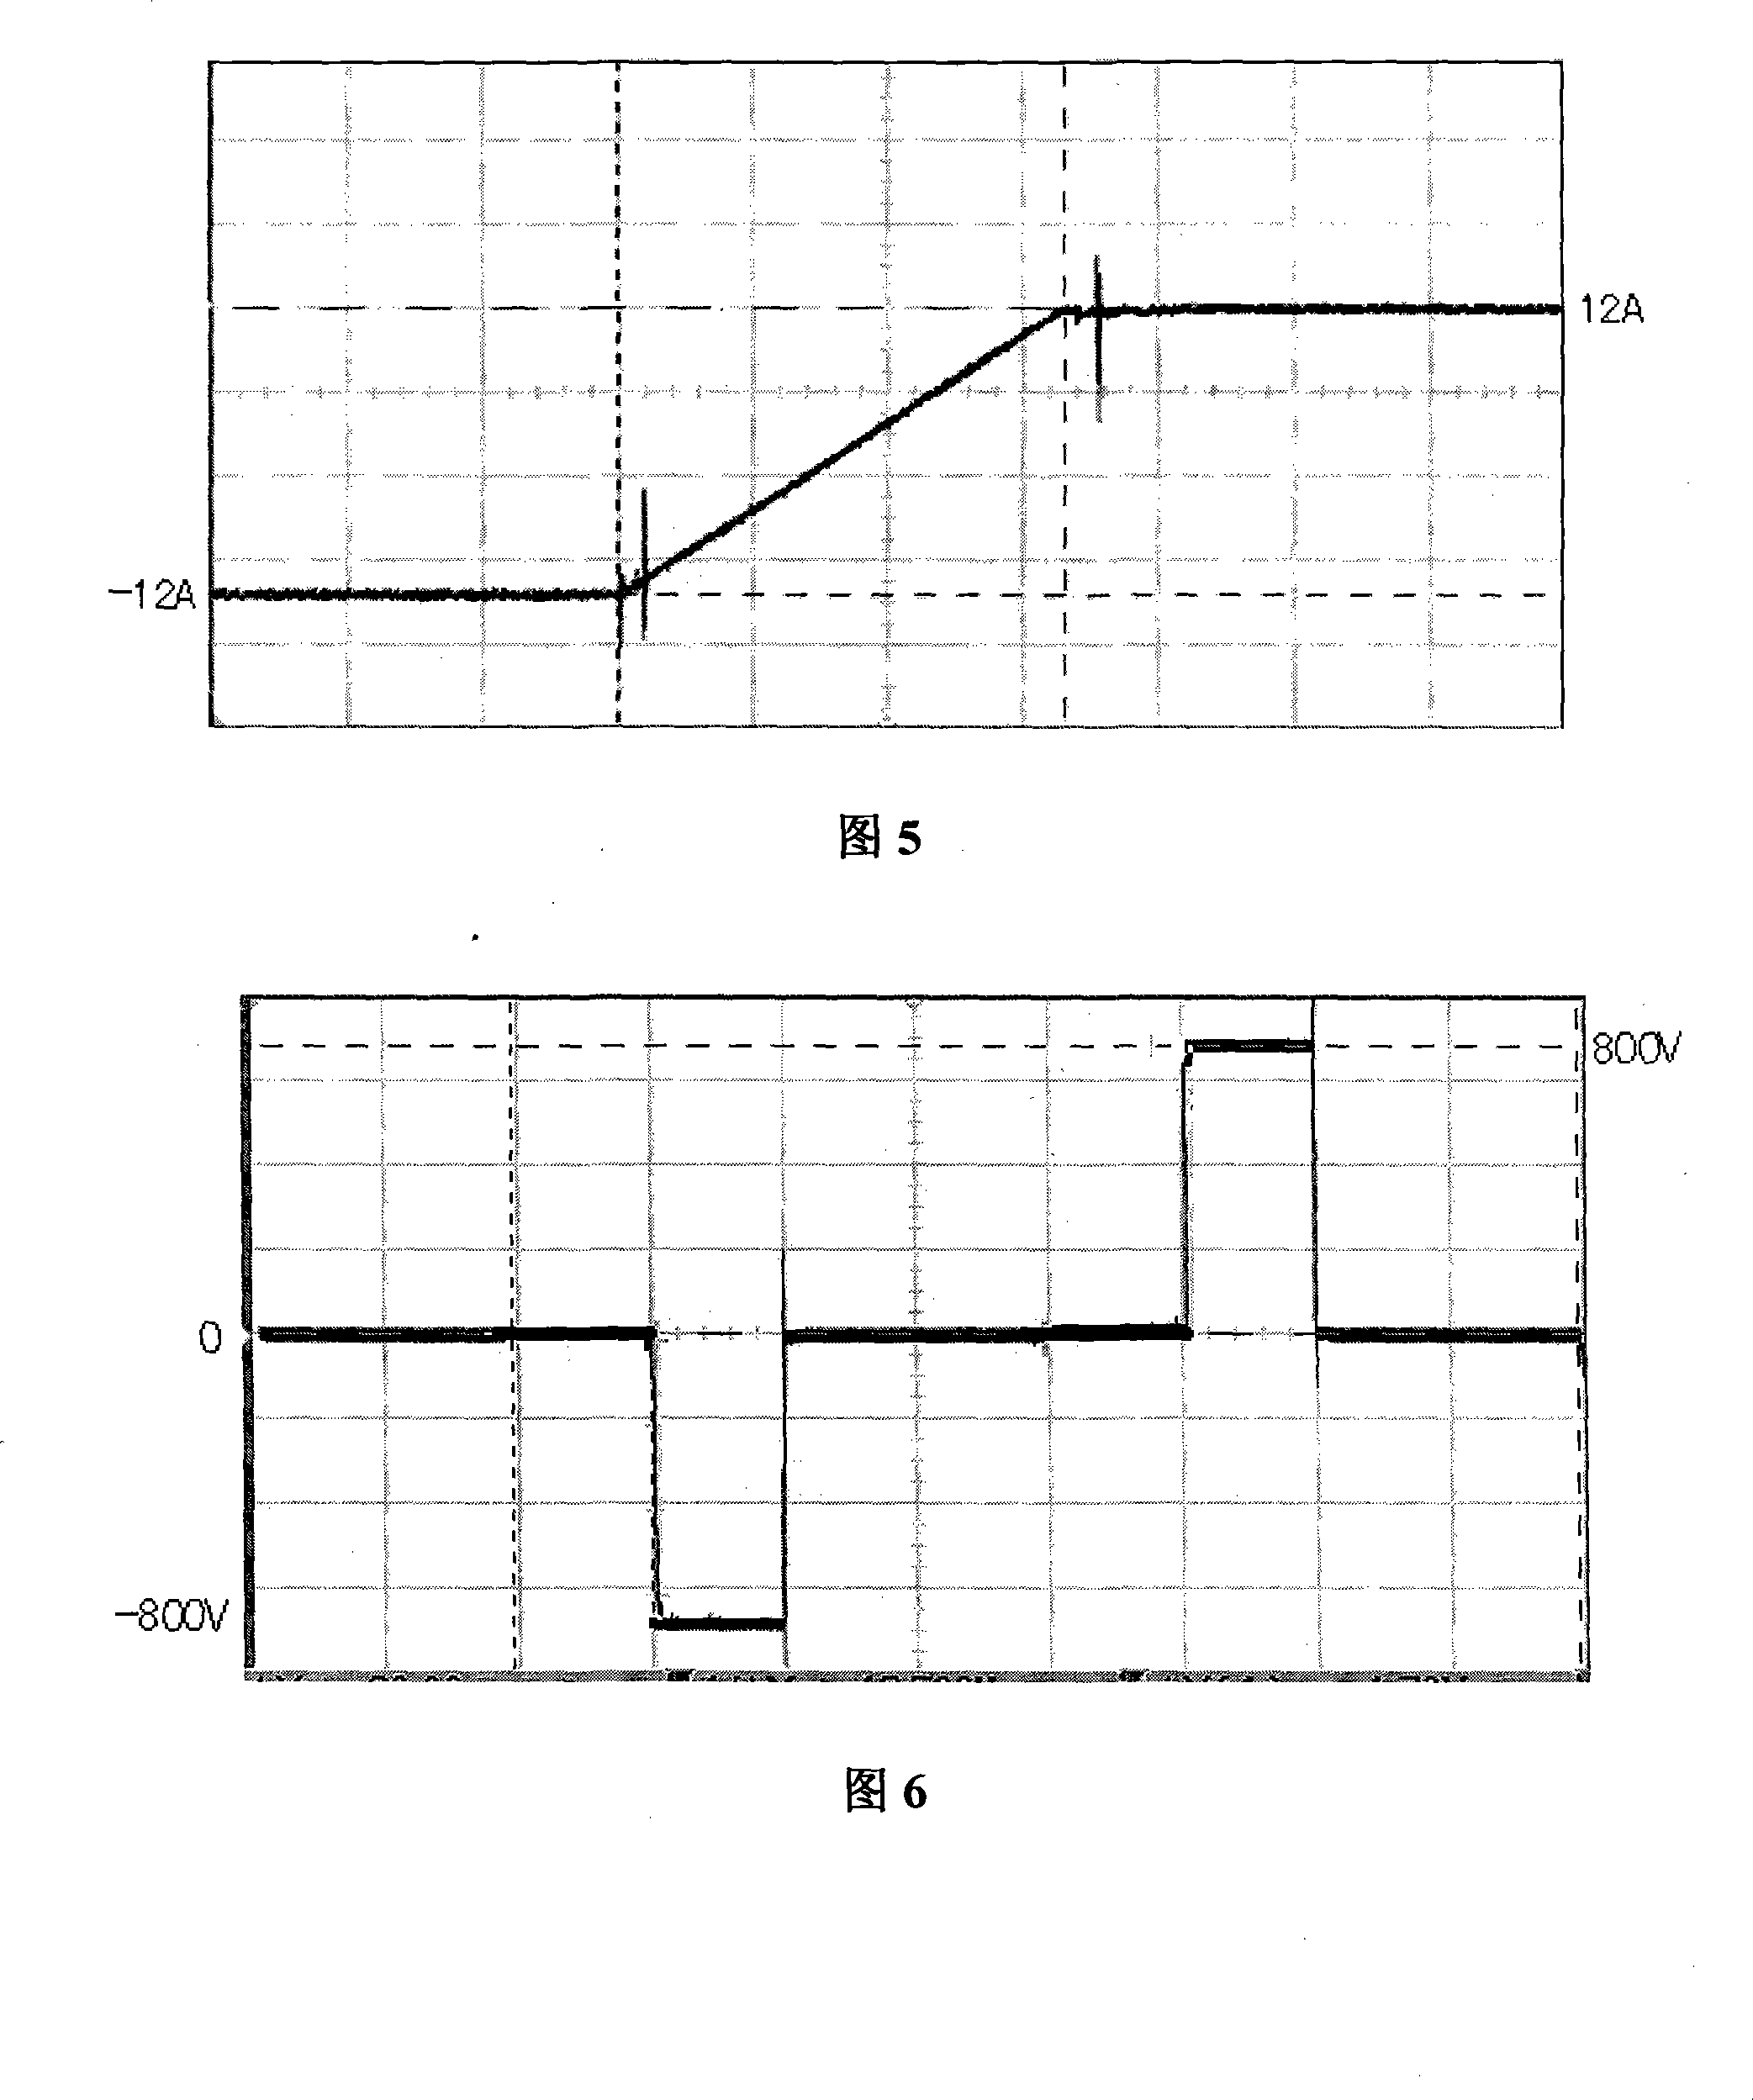 Control method and device for inductive load wide-frequency amplitude-constant AC square wave current